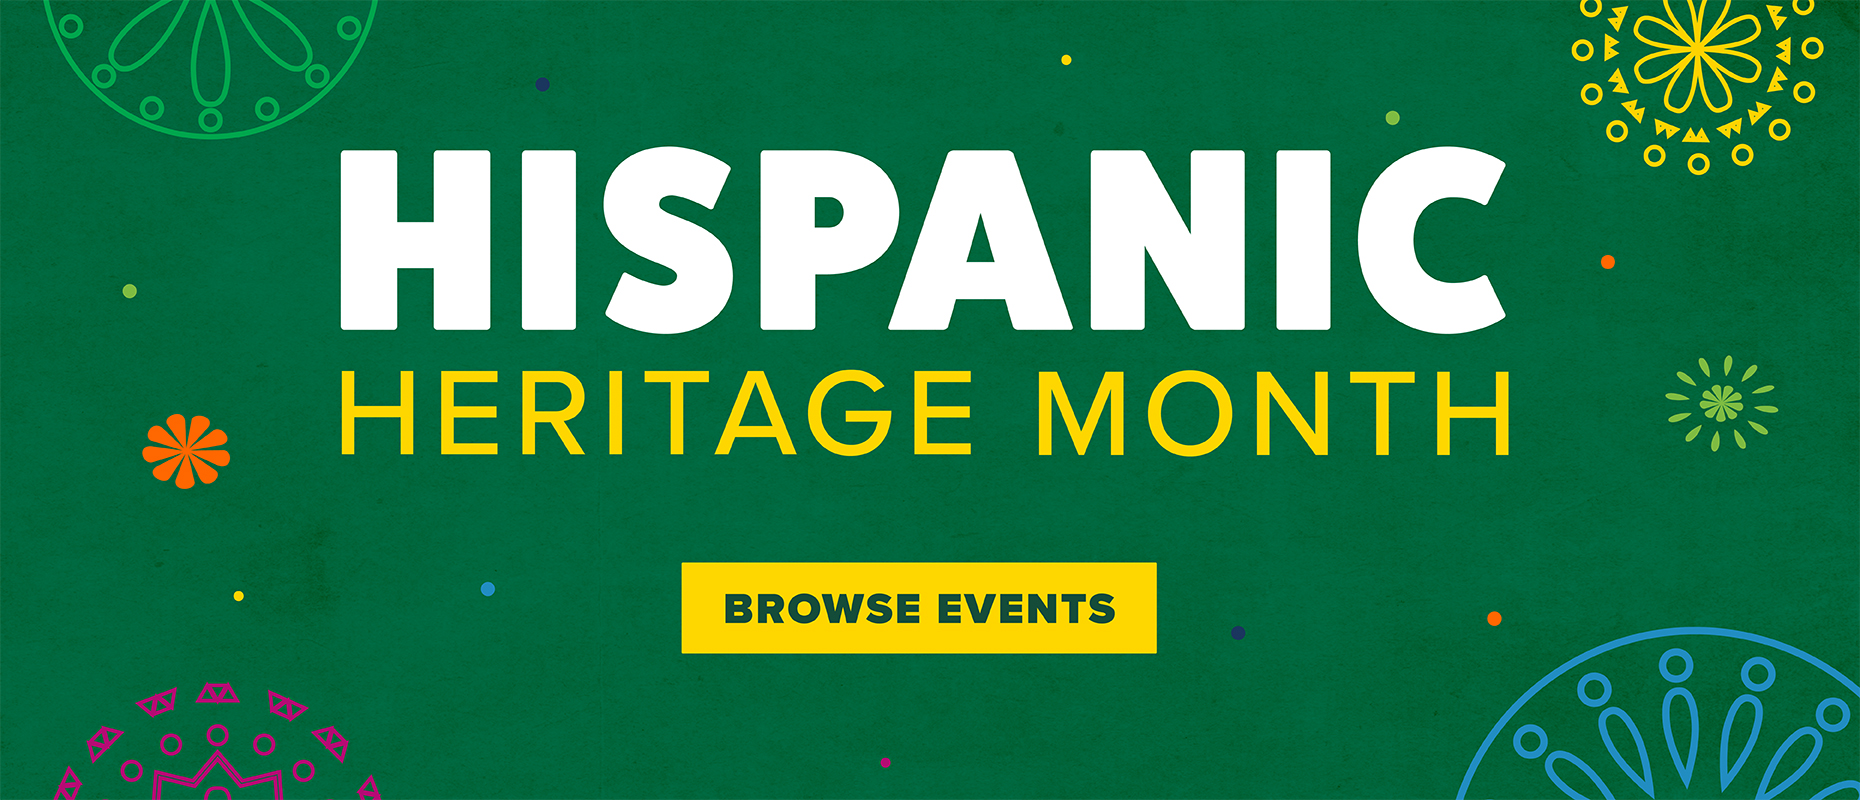 Hispanic Heritage Month: Browse events